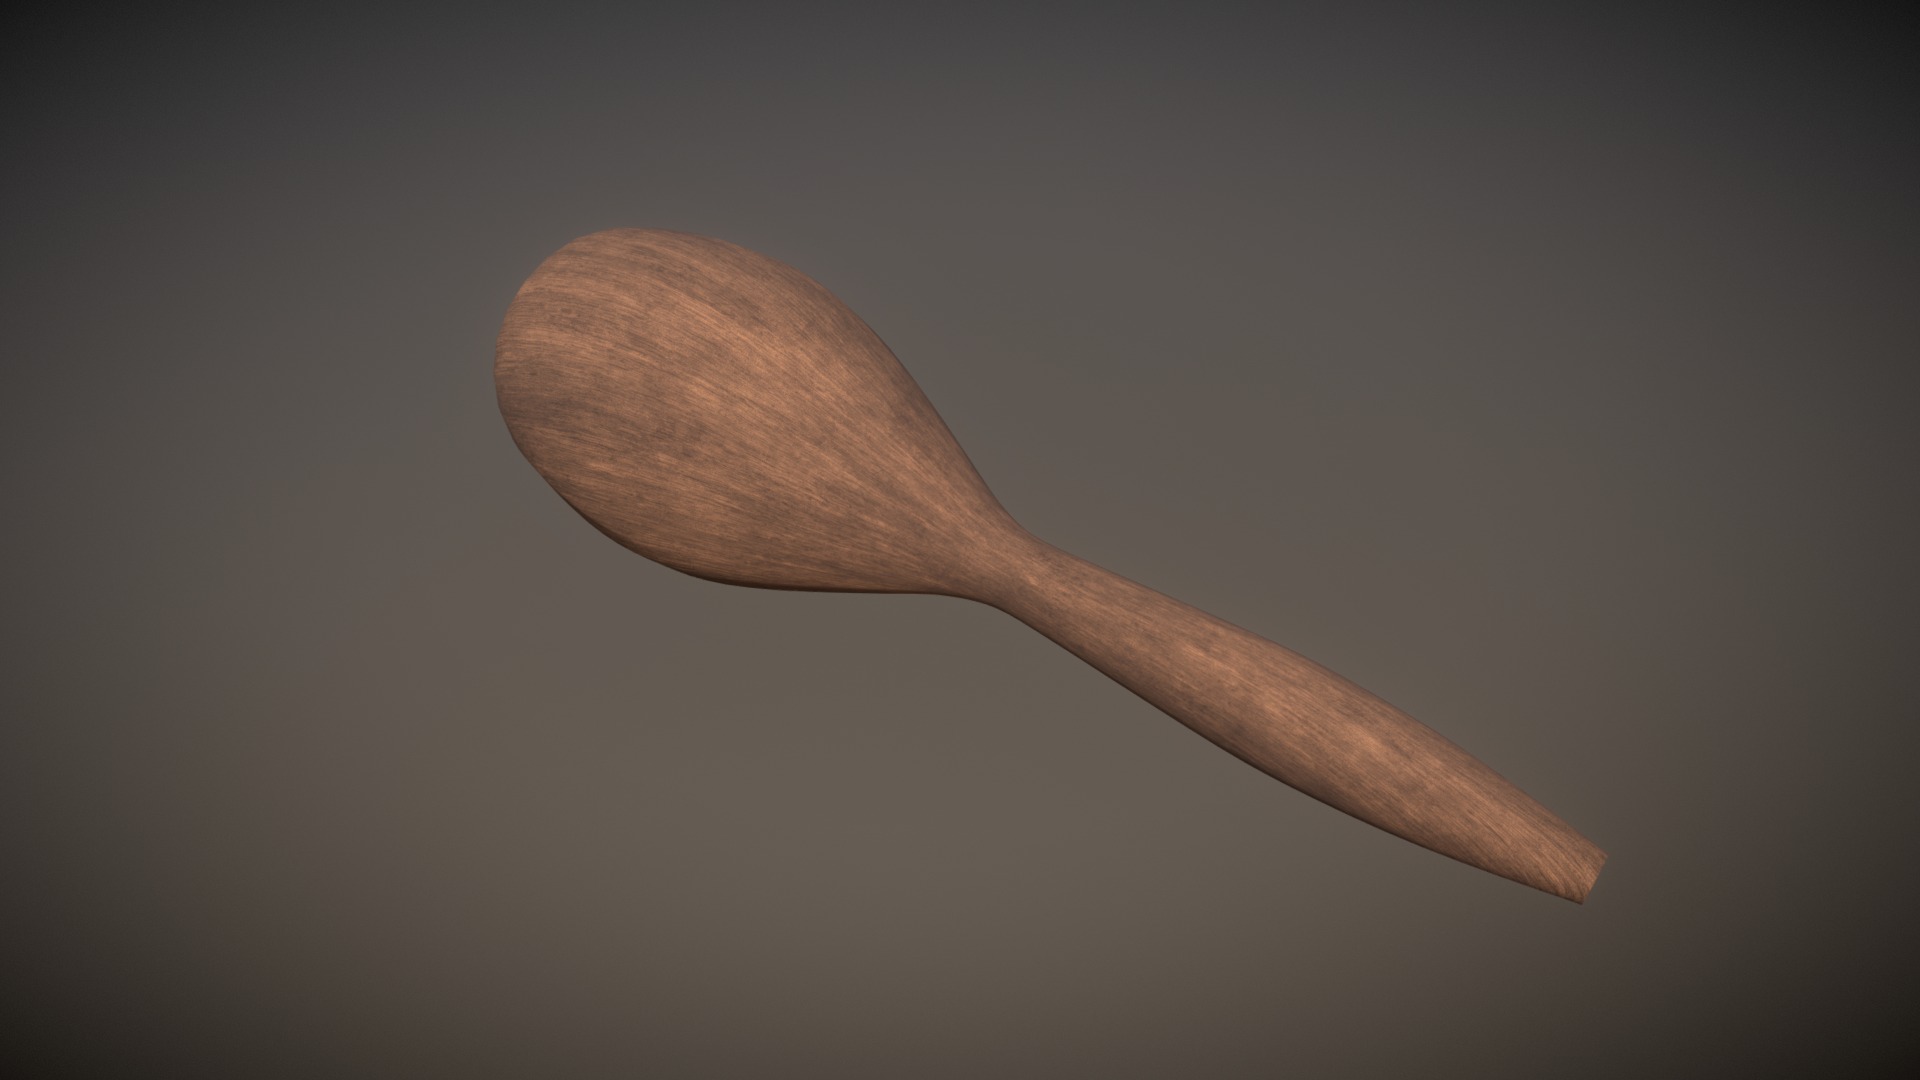 3D model Game Ready Maracas Wooden Walnut Low Poly - This is a 3D model of the Game Ready Maracas Wooden Walnut Low Poly. The 3D model is about a wooden spoon with a handle.